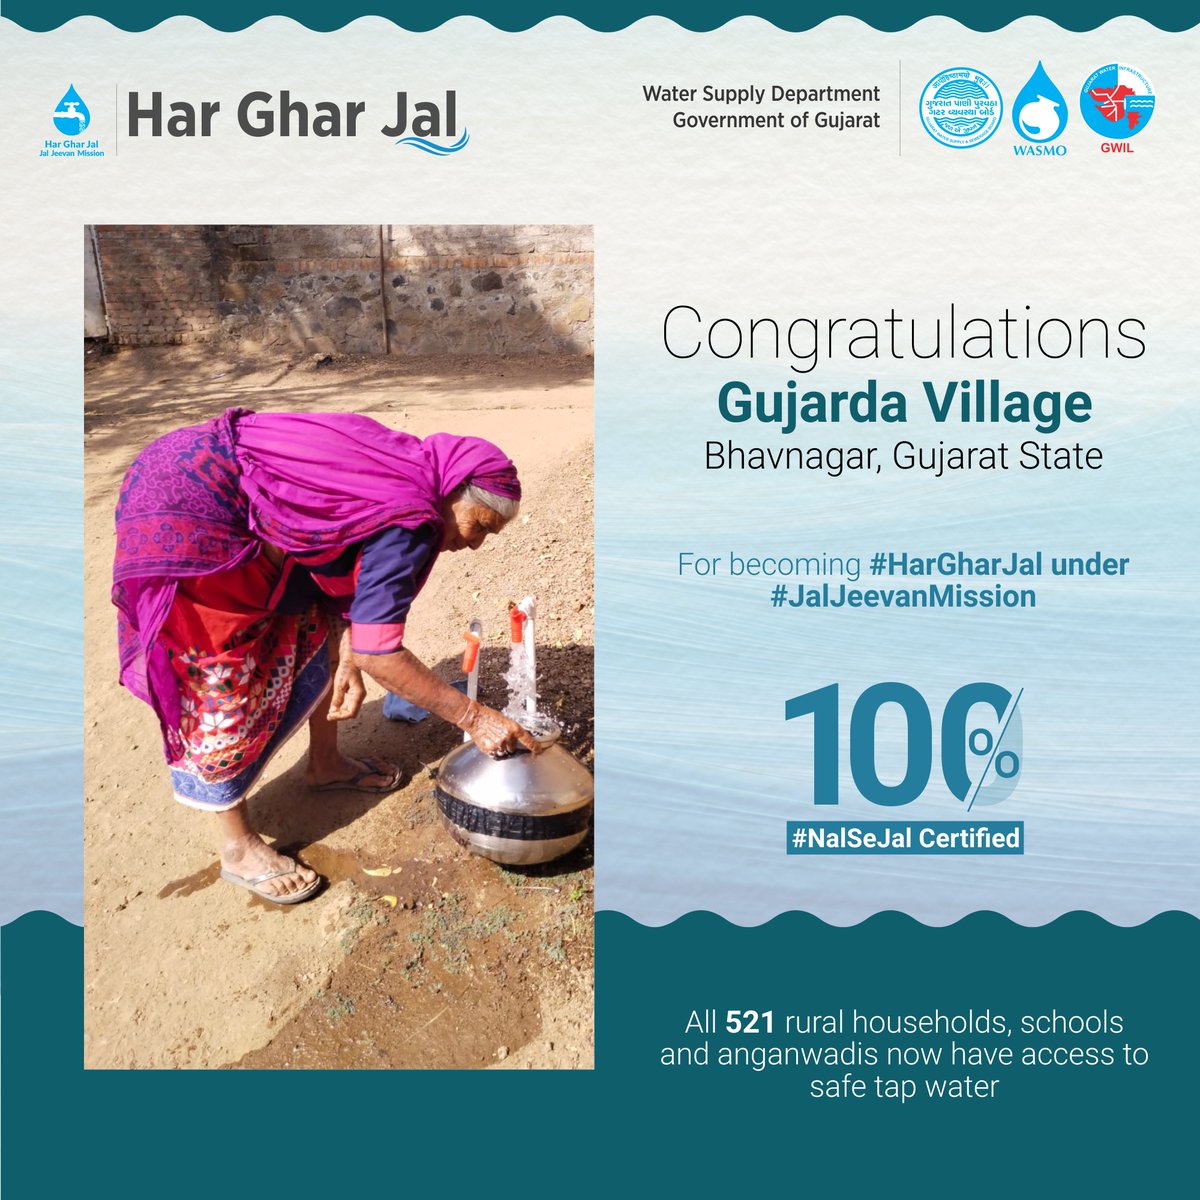 Congratulations to all the people of Gujarda Village of #Bhavnagar, #Gujarat State, for becoming 100% #HarGharNalSeJal certified. All 521 rural households, schools and anganwadis are now getting safe tap water under #JalJeevanMission.